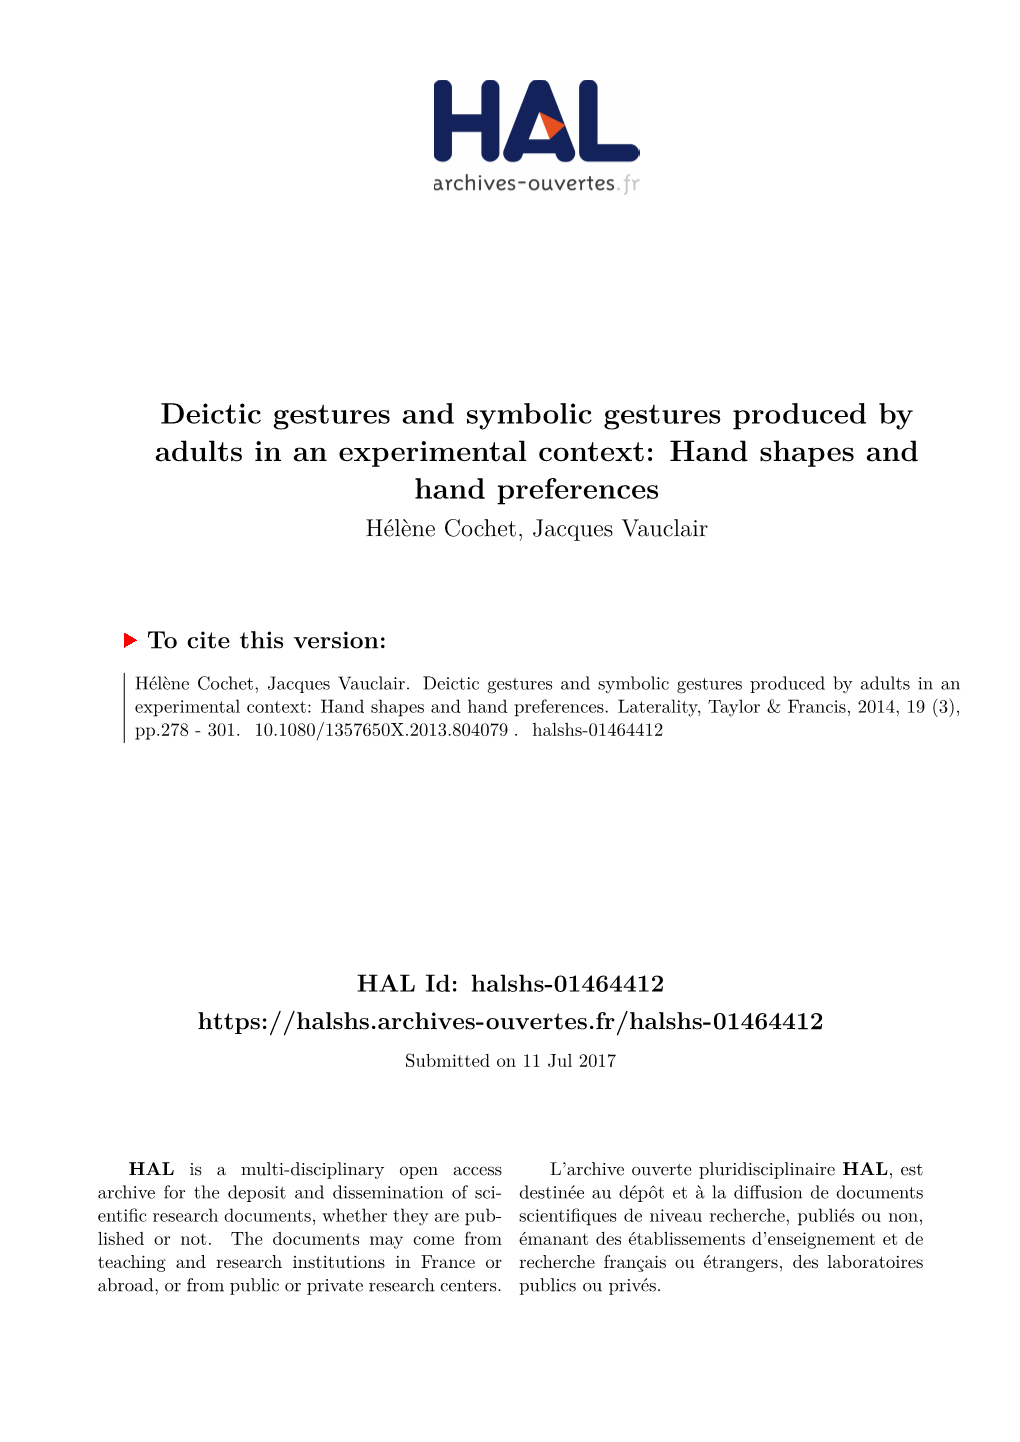 Deictic Gestures and Symbolic Gestures Produced by Adults in an Experimental Context: Hand Shapes and Hand Preferences Hélène Cochet, Jacques Vauclair